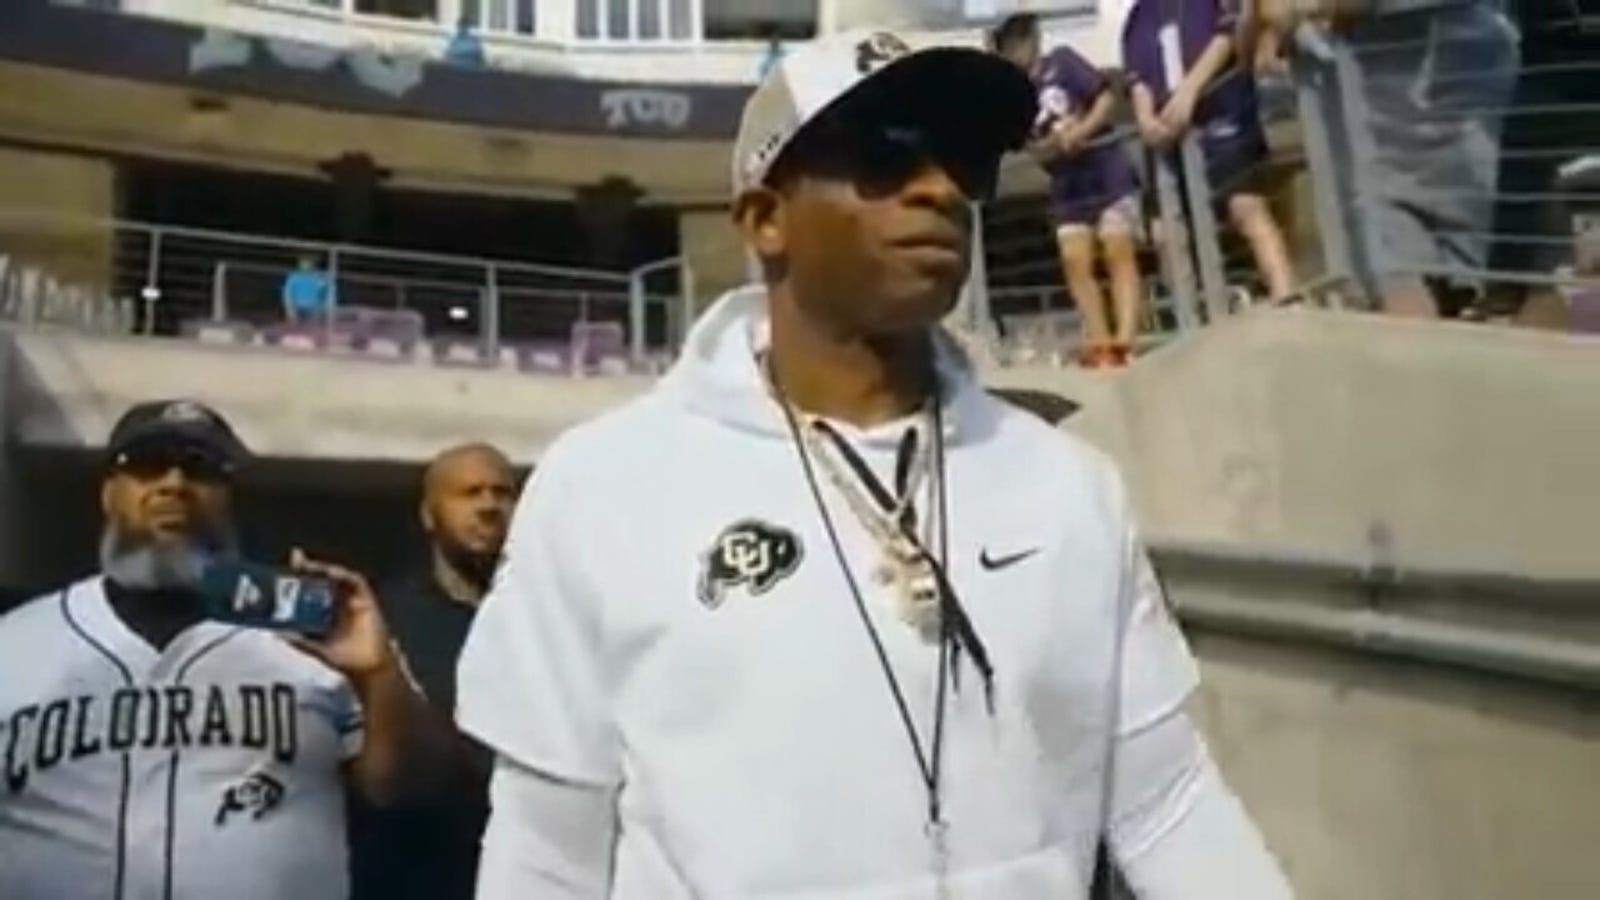 Jerry Jones, Leroy Butler, and more talk about Deion Sanders' greatness